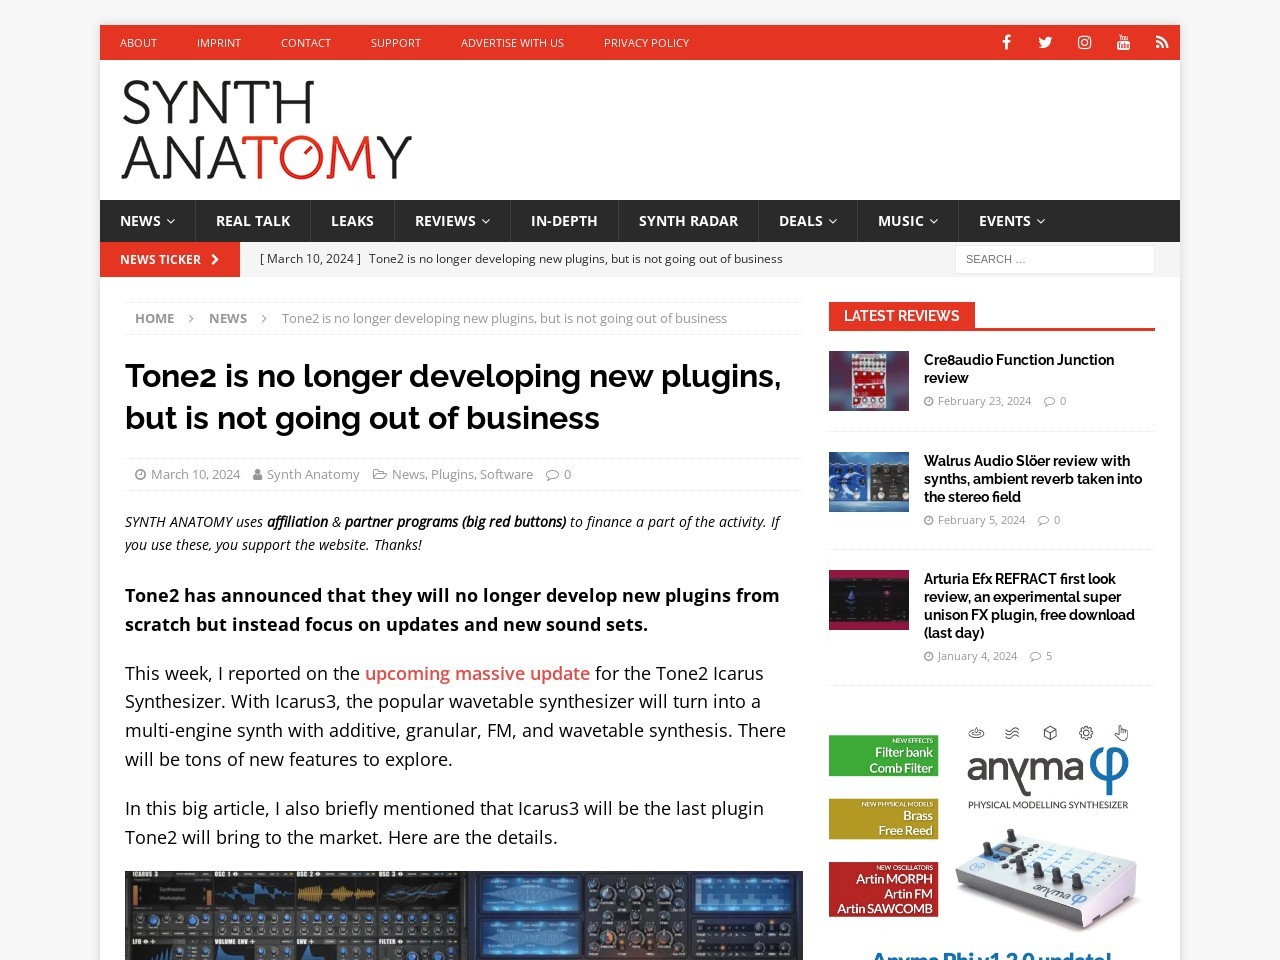 Tone2 is no longer developing new plugins, but is not going out of business - SYNTH ANATOMY